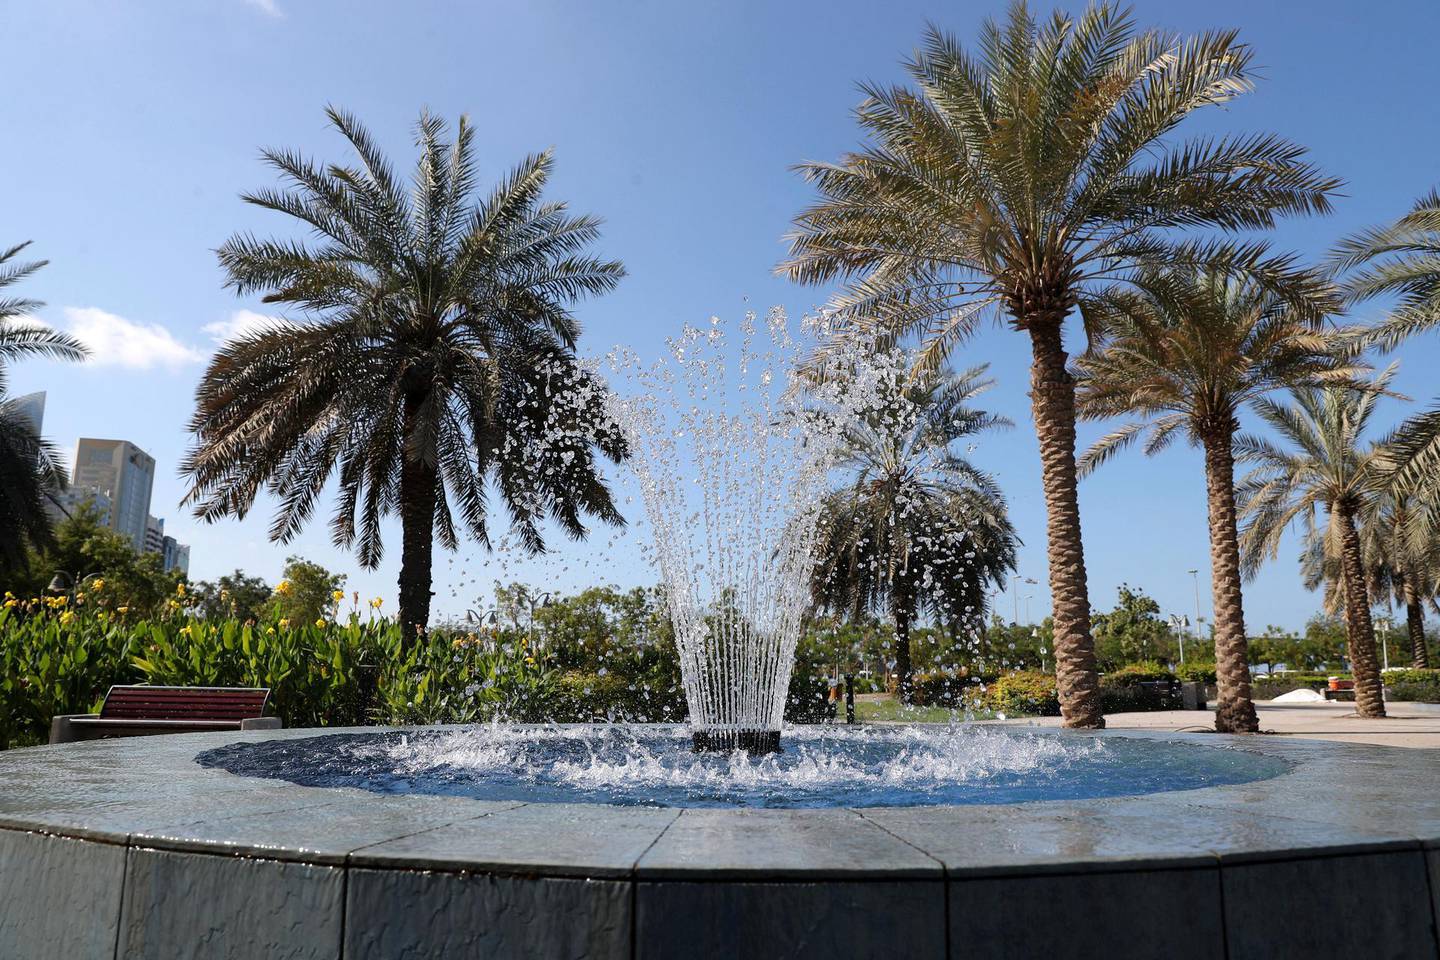 Abu Dhabi, United Arab Emirates - December 13, 2018: Lake Park, Corniche Road. Pictures of different parks all over Abu Dhabi. Thursday the 13th of December 2018 in Abu Dhabi. Chris Whiteoak / The National